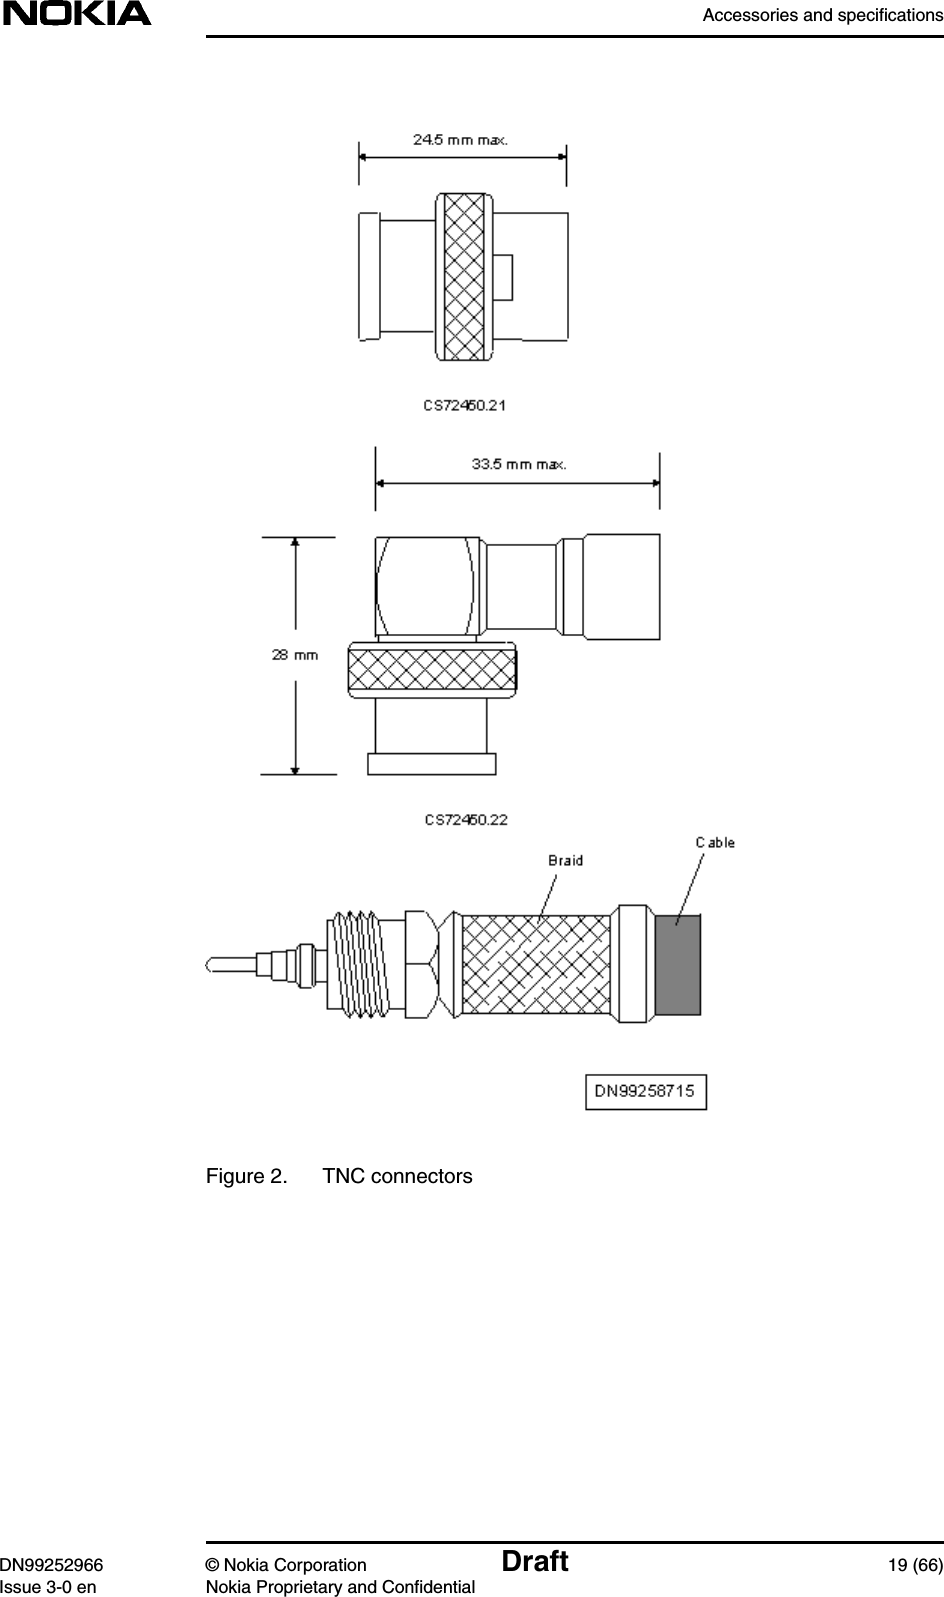 Accessories and specificationsDN99252966 © Nokia Corporation Draft 19 (66)Issue 3-0 en Nokia Proprietary and ConfidentialFigure 2. TNC connectors